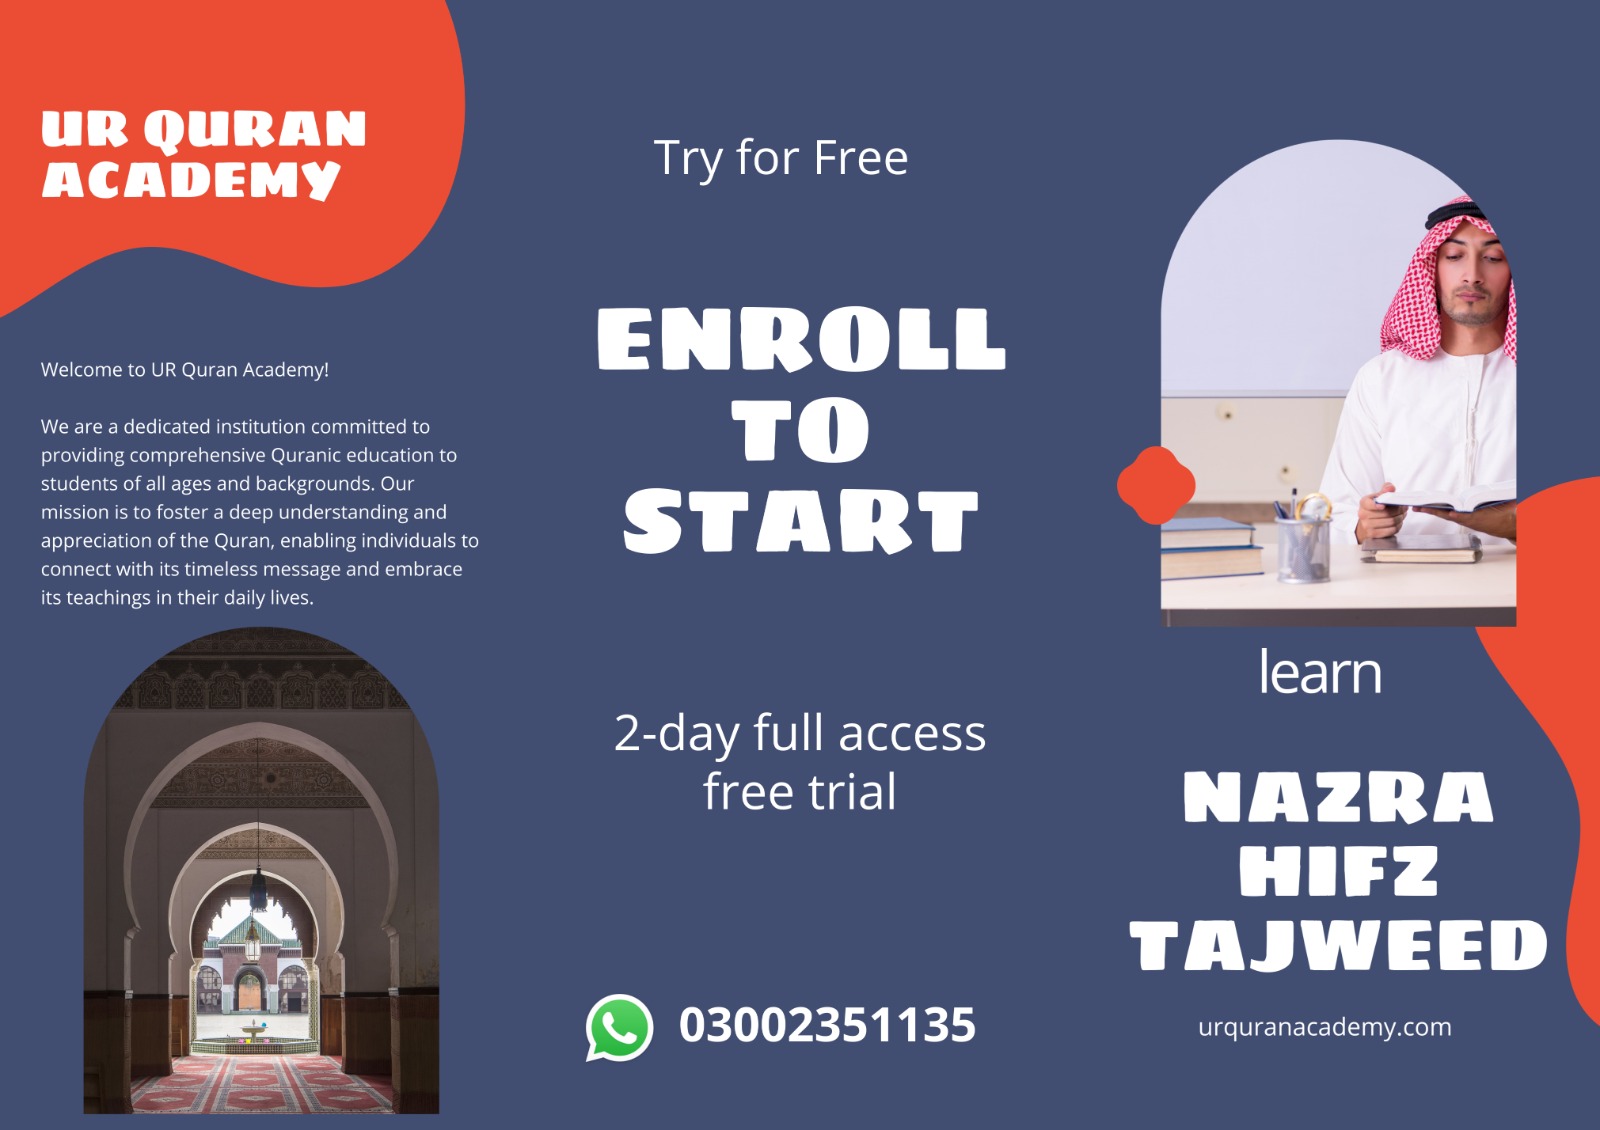 OLTTTY.T
ACADEMY

Welcome to UR Quran Academy!

We are a dedicated institution committed to
providing comprehensive Qui L&R
students of all ages and back Our
mission is to foster a deep understanding and

 
 

appreciation of the Quran, enabling individuals to

connect with its timeless message and embrace
its teachings in their daily lives.

 

Try for Free

ENROLL
|
START

2-day full access
free trial

(© 03002351135

 

x11

LJ. F419.)
LL] |r
Ly vl.)

urquranacademy.com